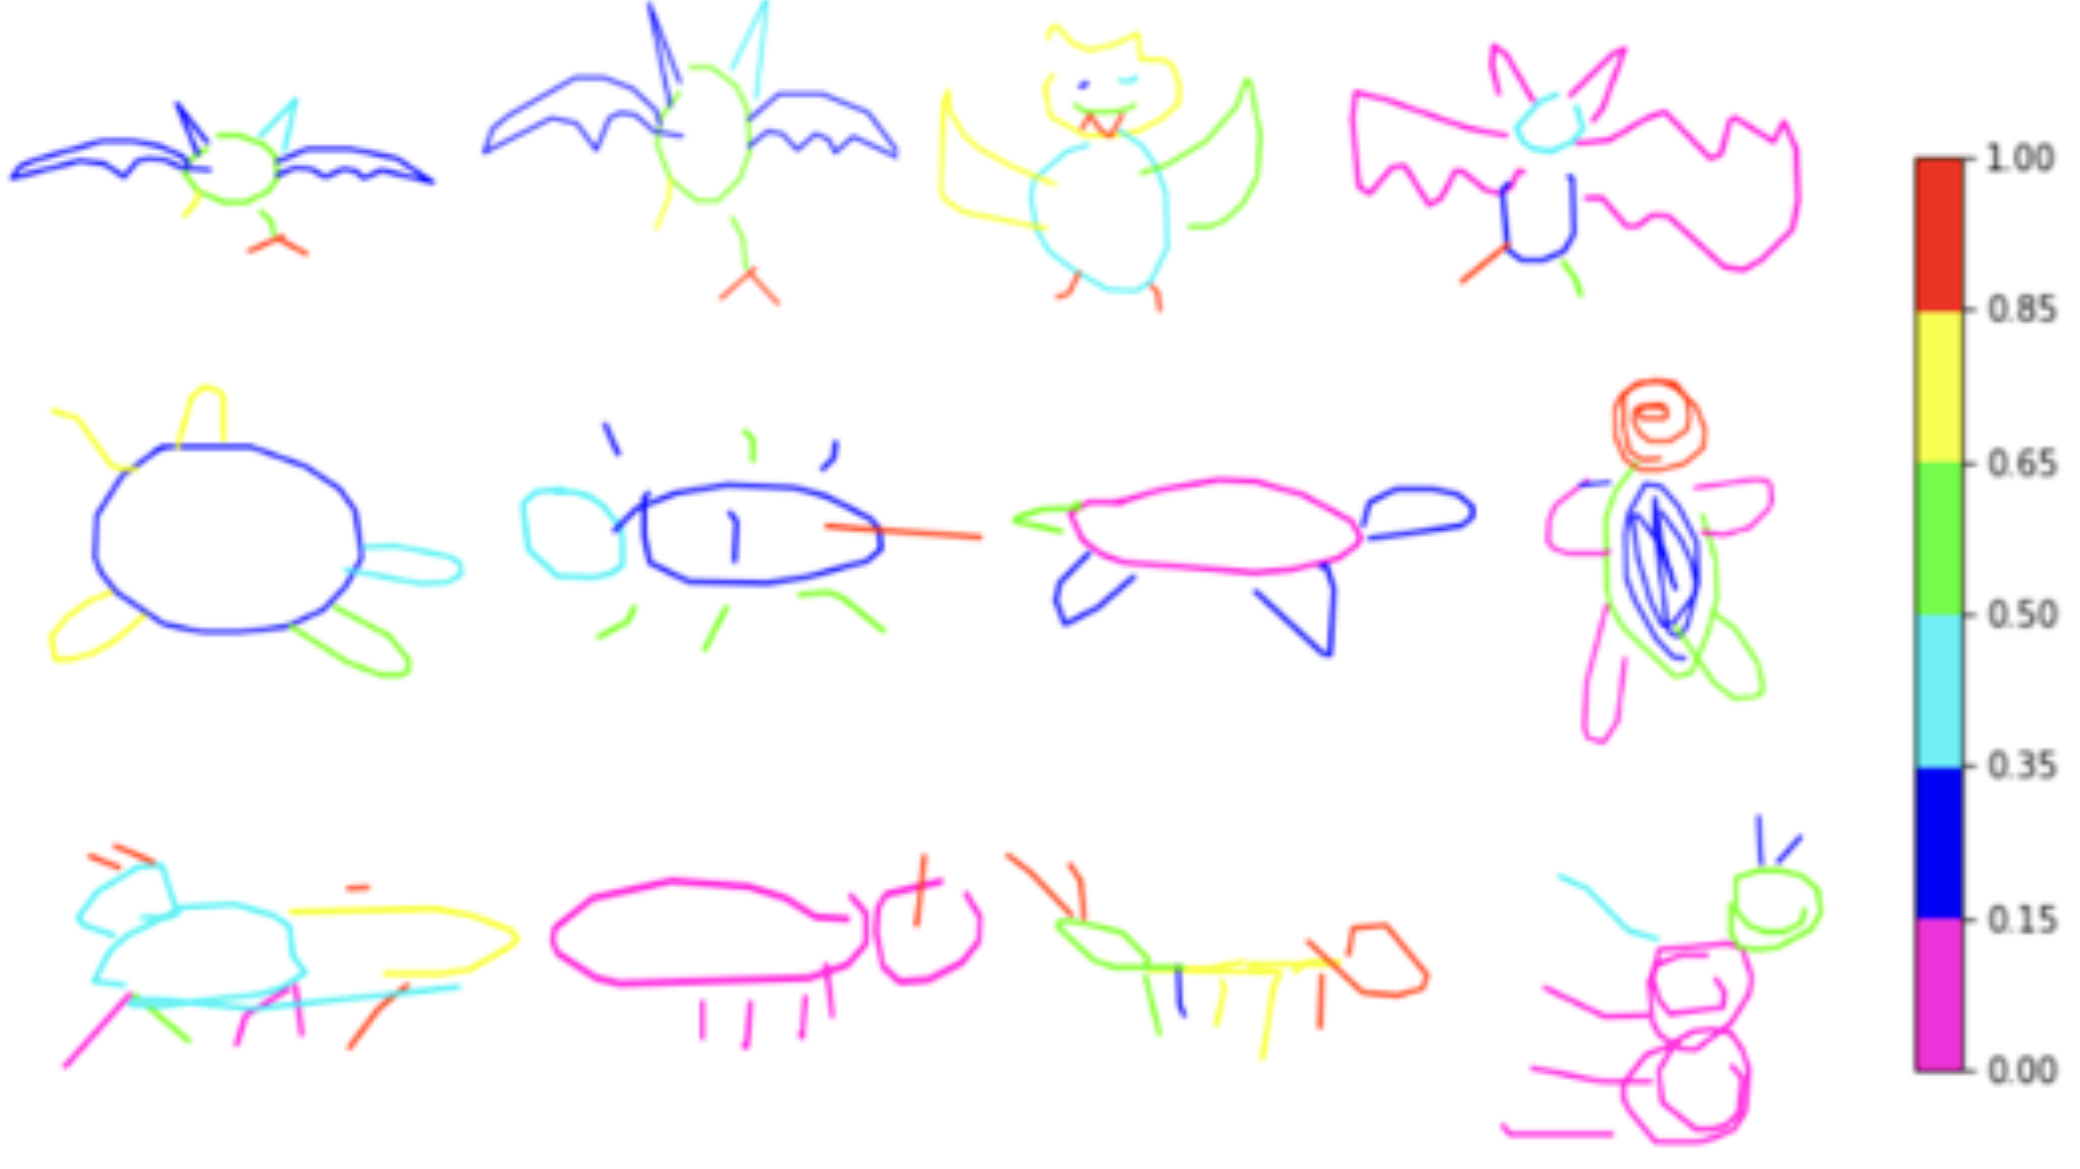 A 3 by 4 grid of human-made sketches with a color bar on the right. The first, second, and third row show bat (animal), turtle, and ant sketches, respectively.